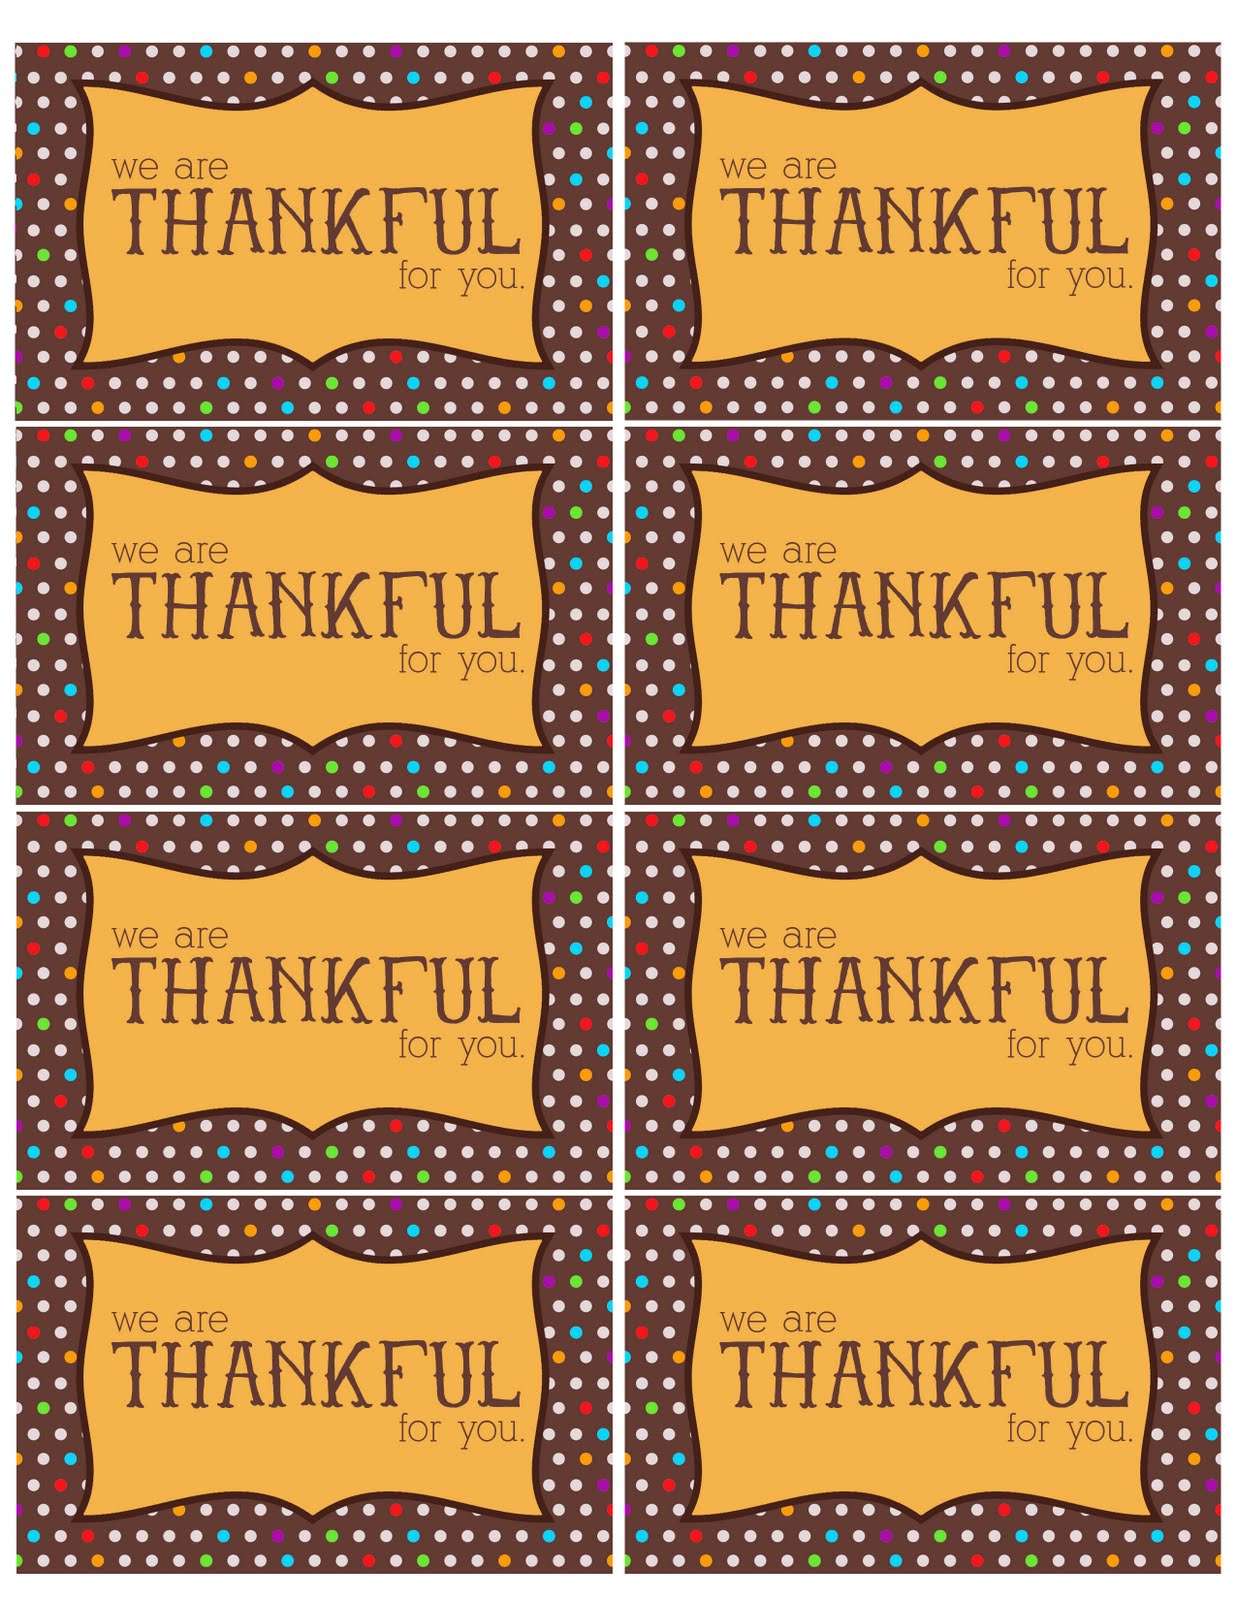 Extra Thankful For You Printable Free